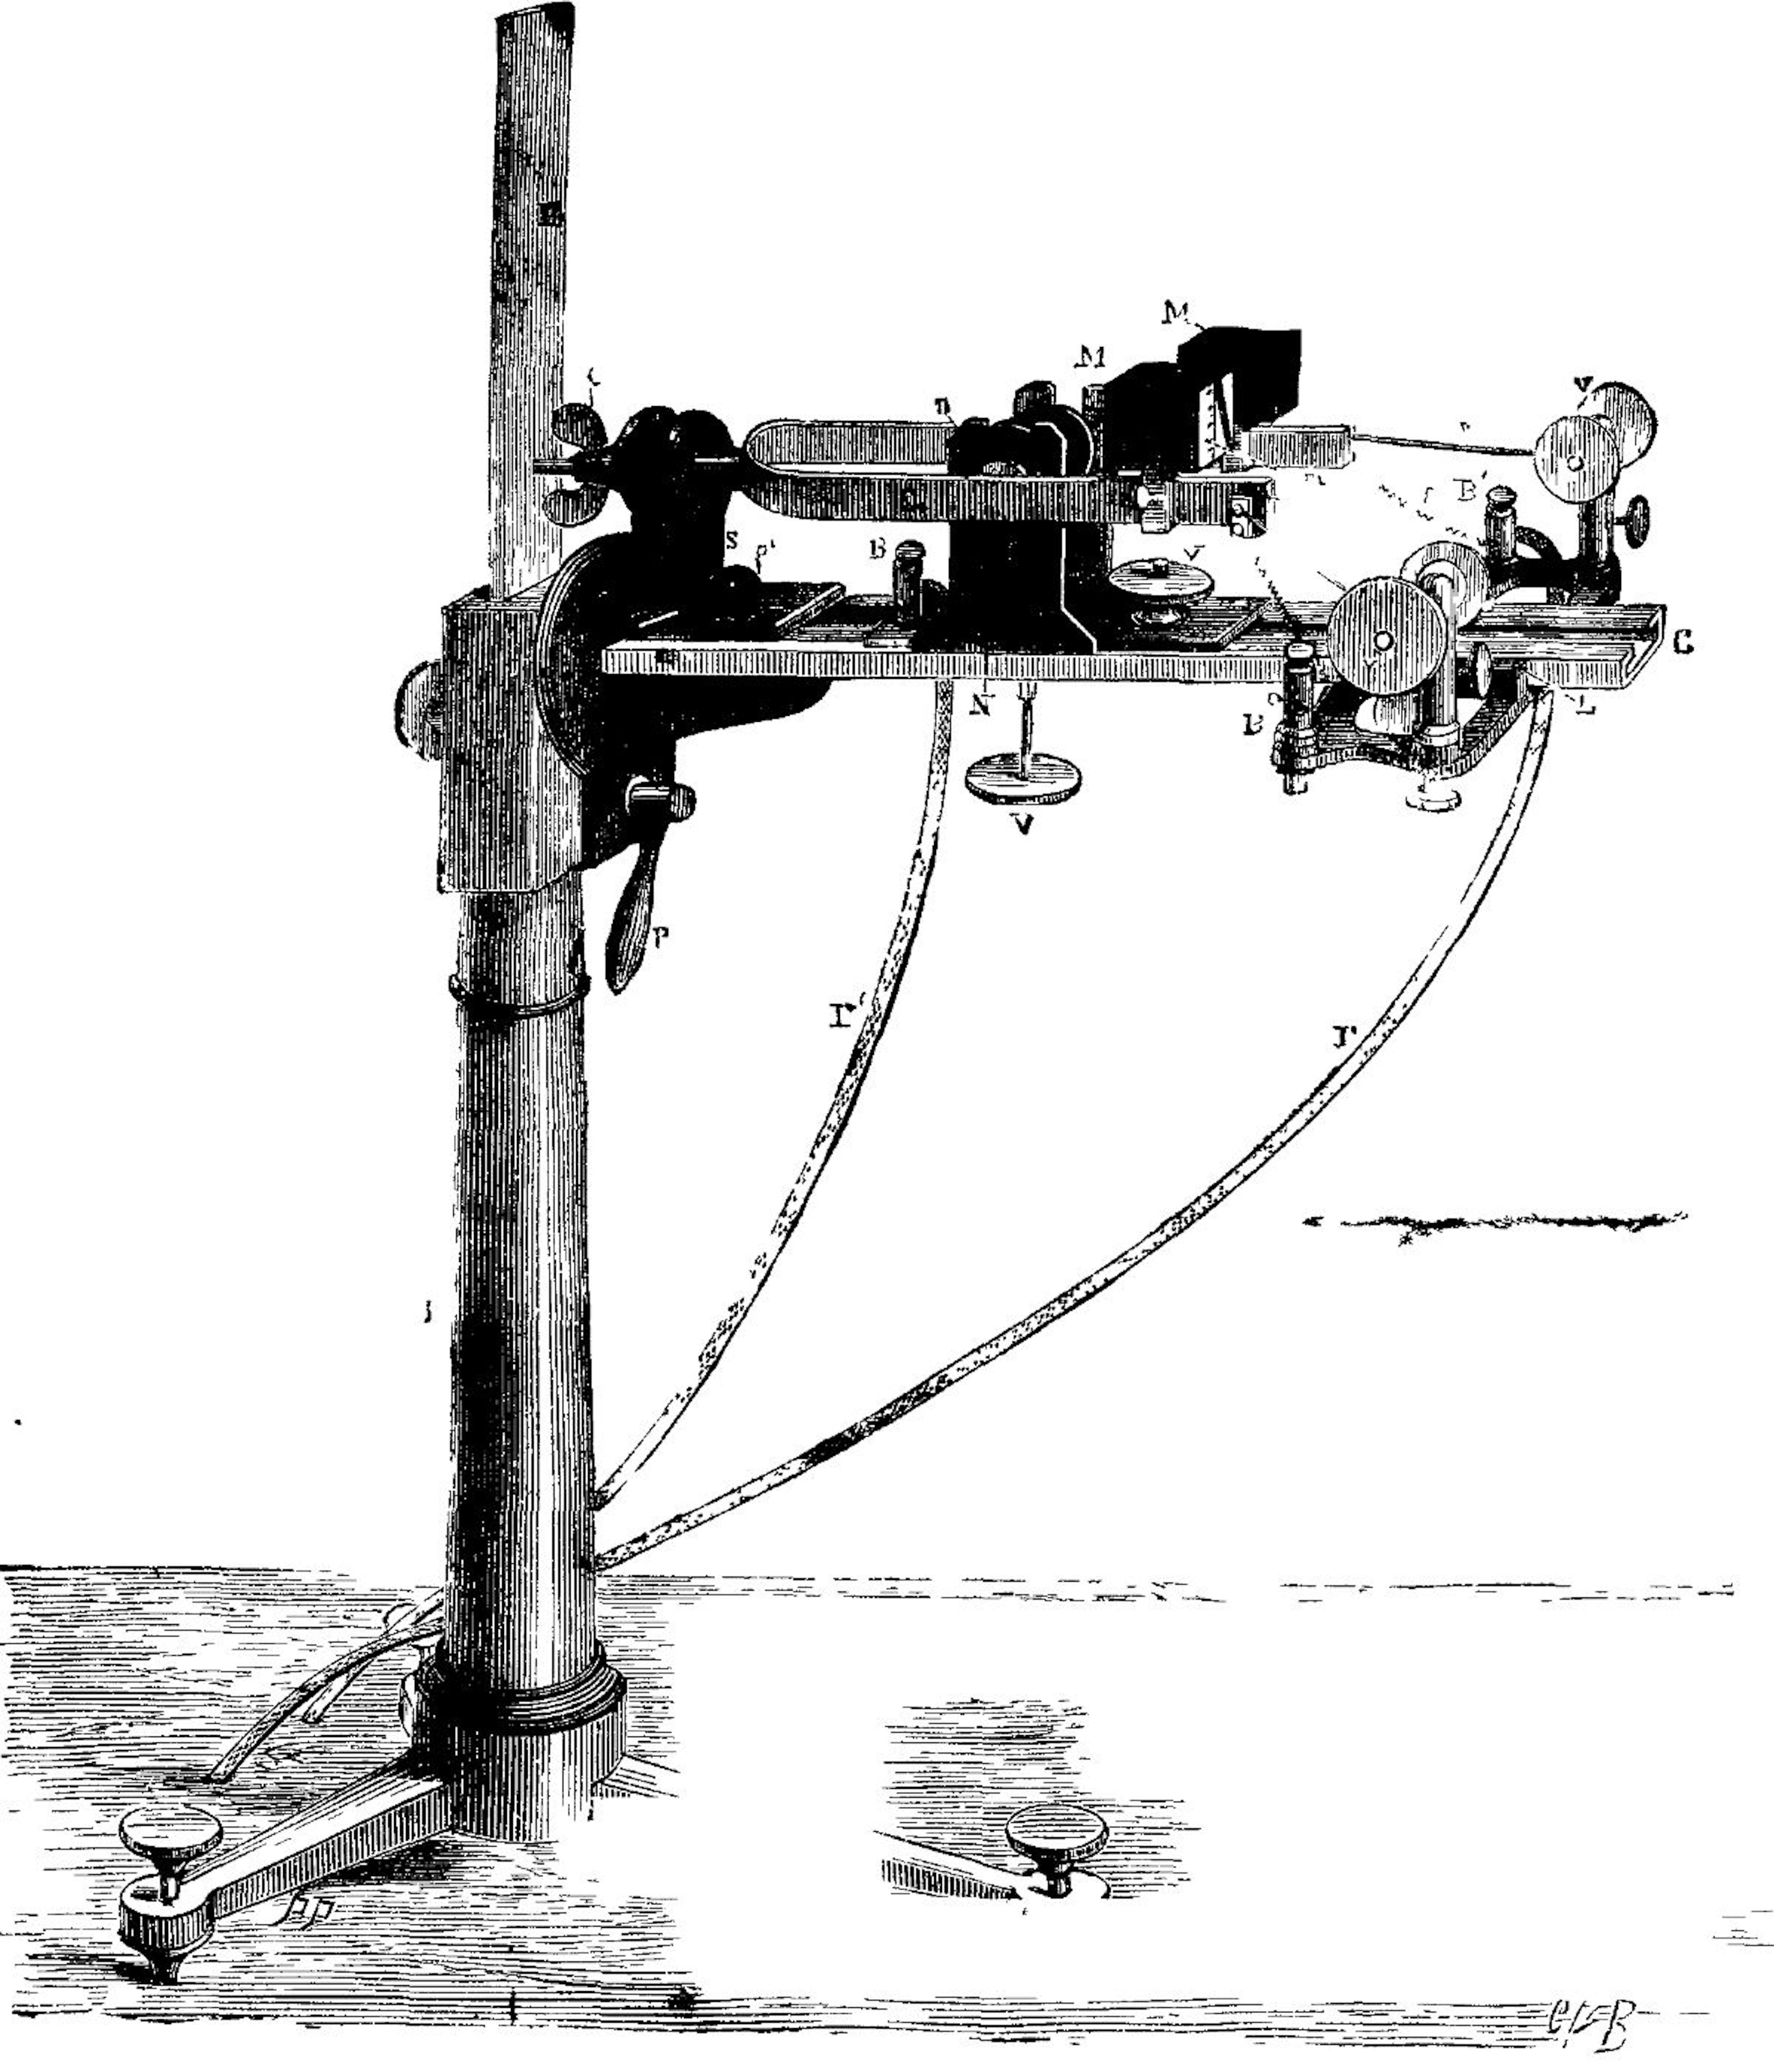 FIG. 4.—VERY RAPID ELECTRIC TUNING FORK.